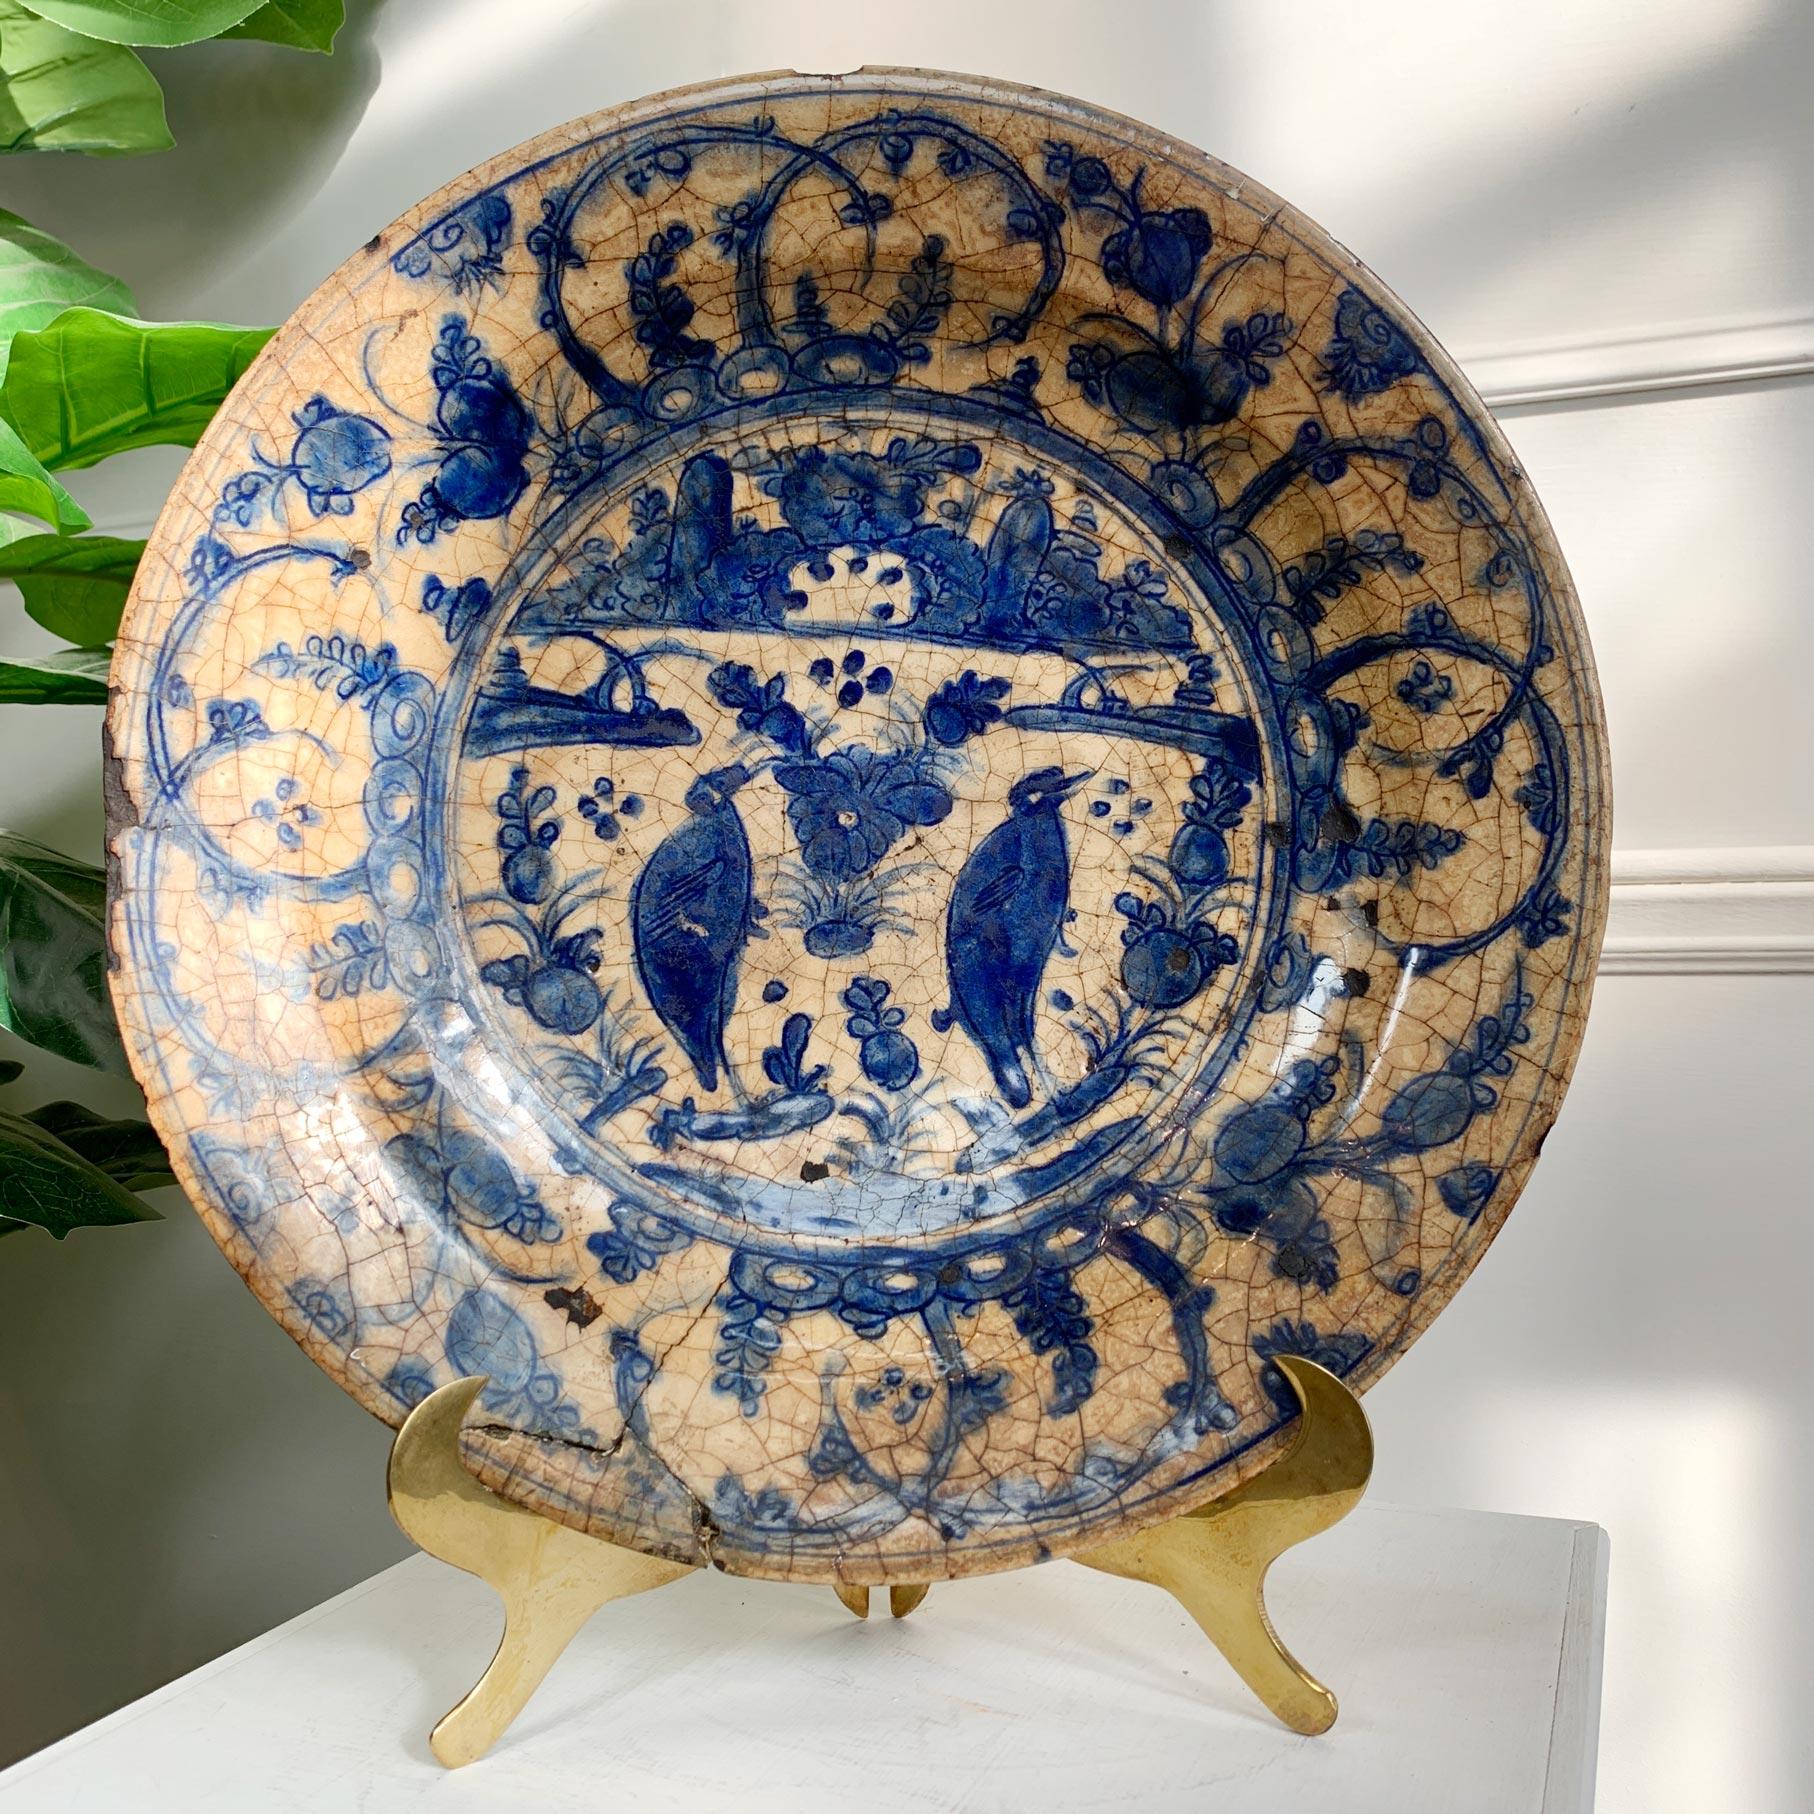 Probably Kirman, 16th/17th Century, Persia. Of Low rounded profile, on short a foot and with sloping rim, this Kirman blue and white dish with white slip decoration and stylized dense floral pattern with birds to the centre, stained and with obvious